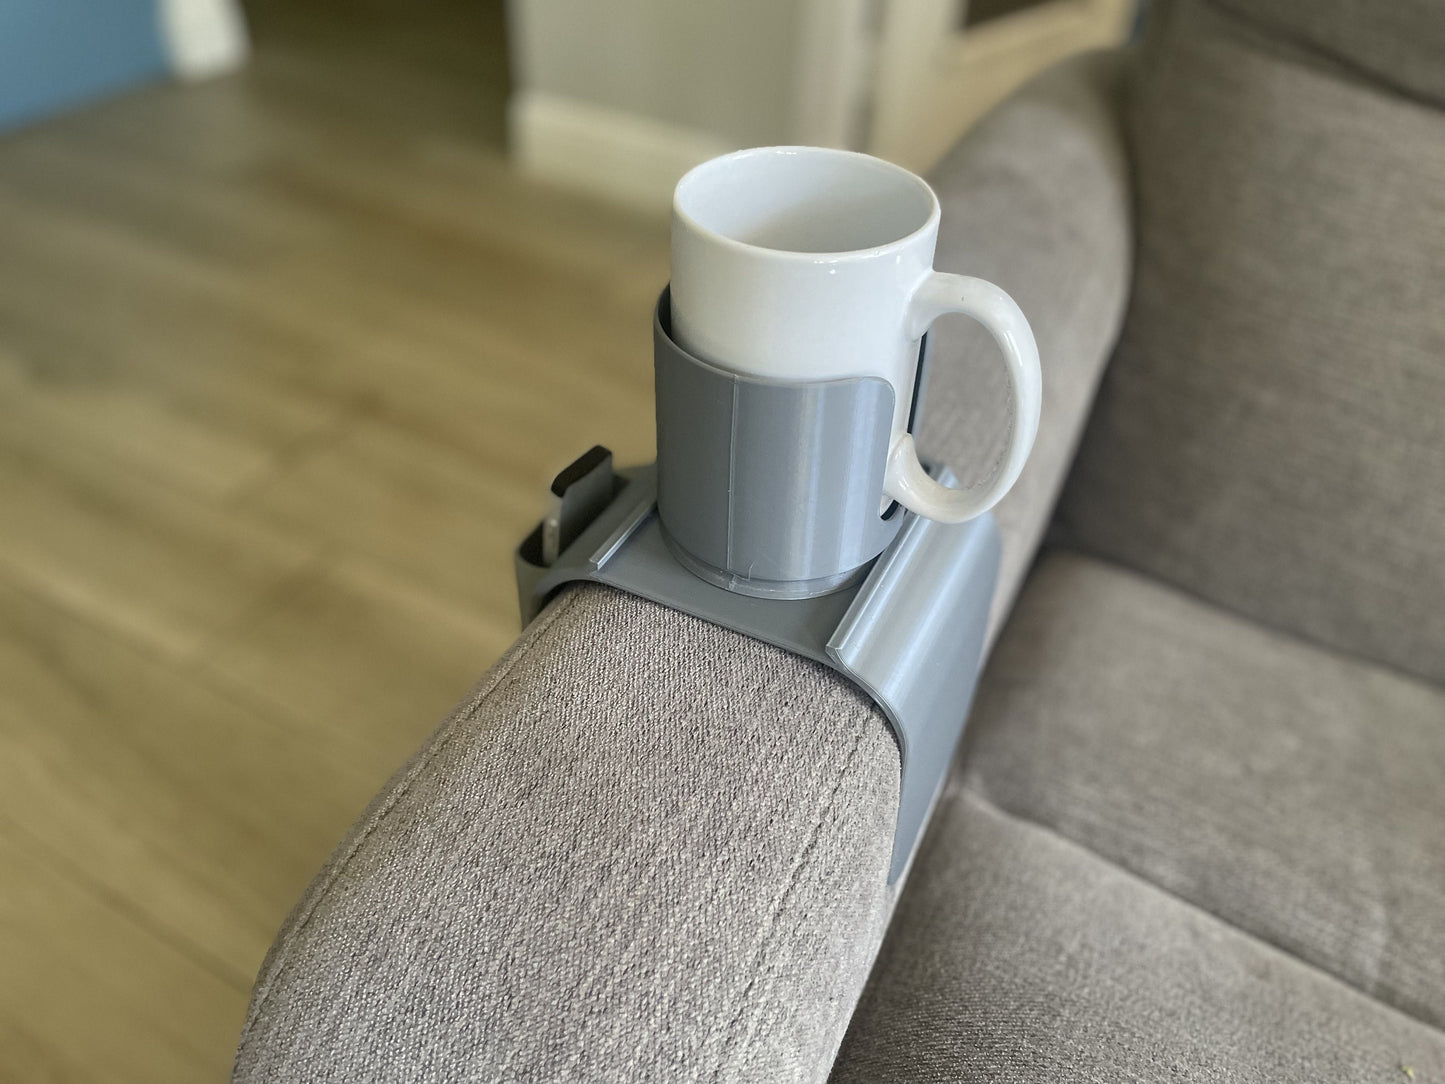 Couch Arm Rest Cup Holder, Sofa Cup Holder